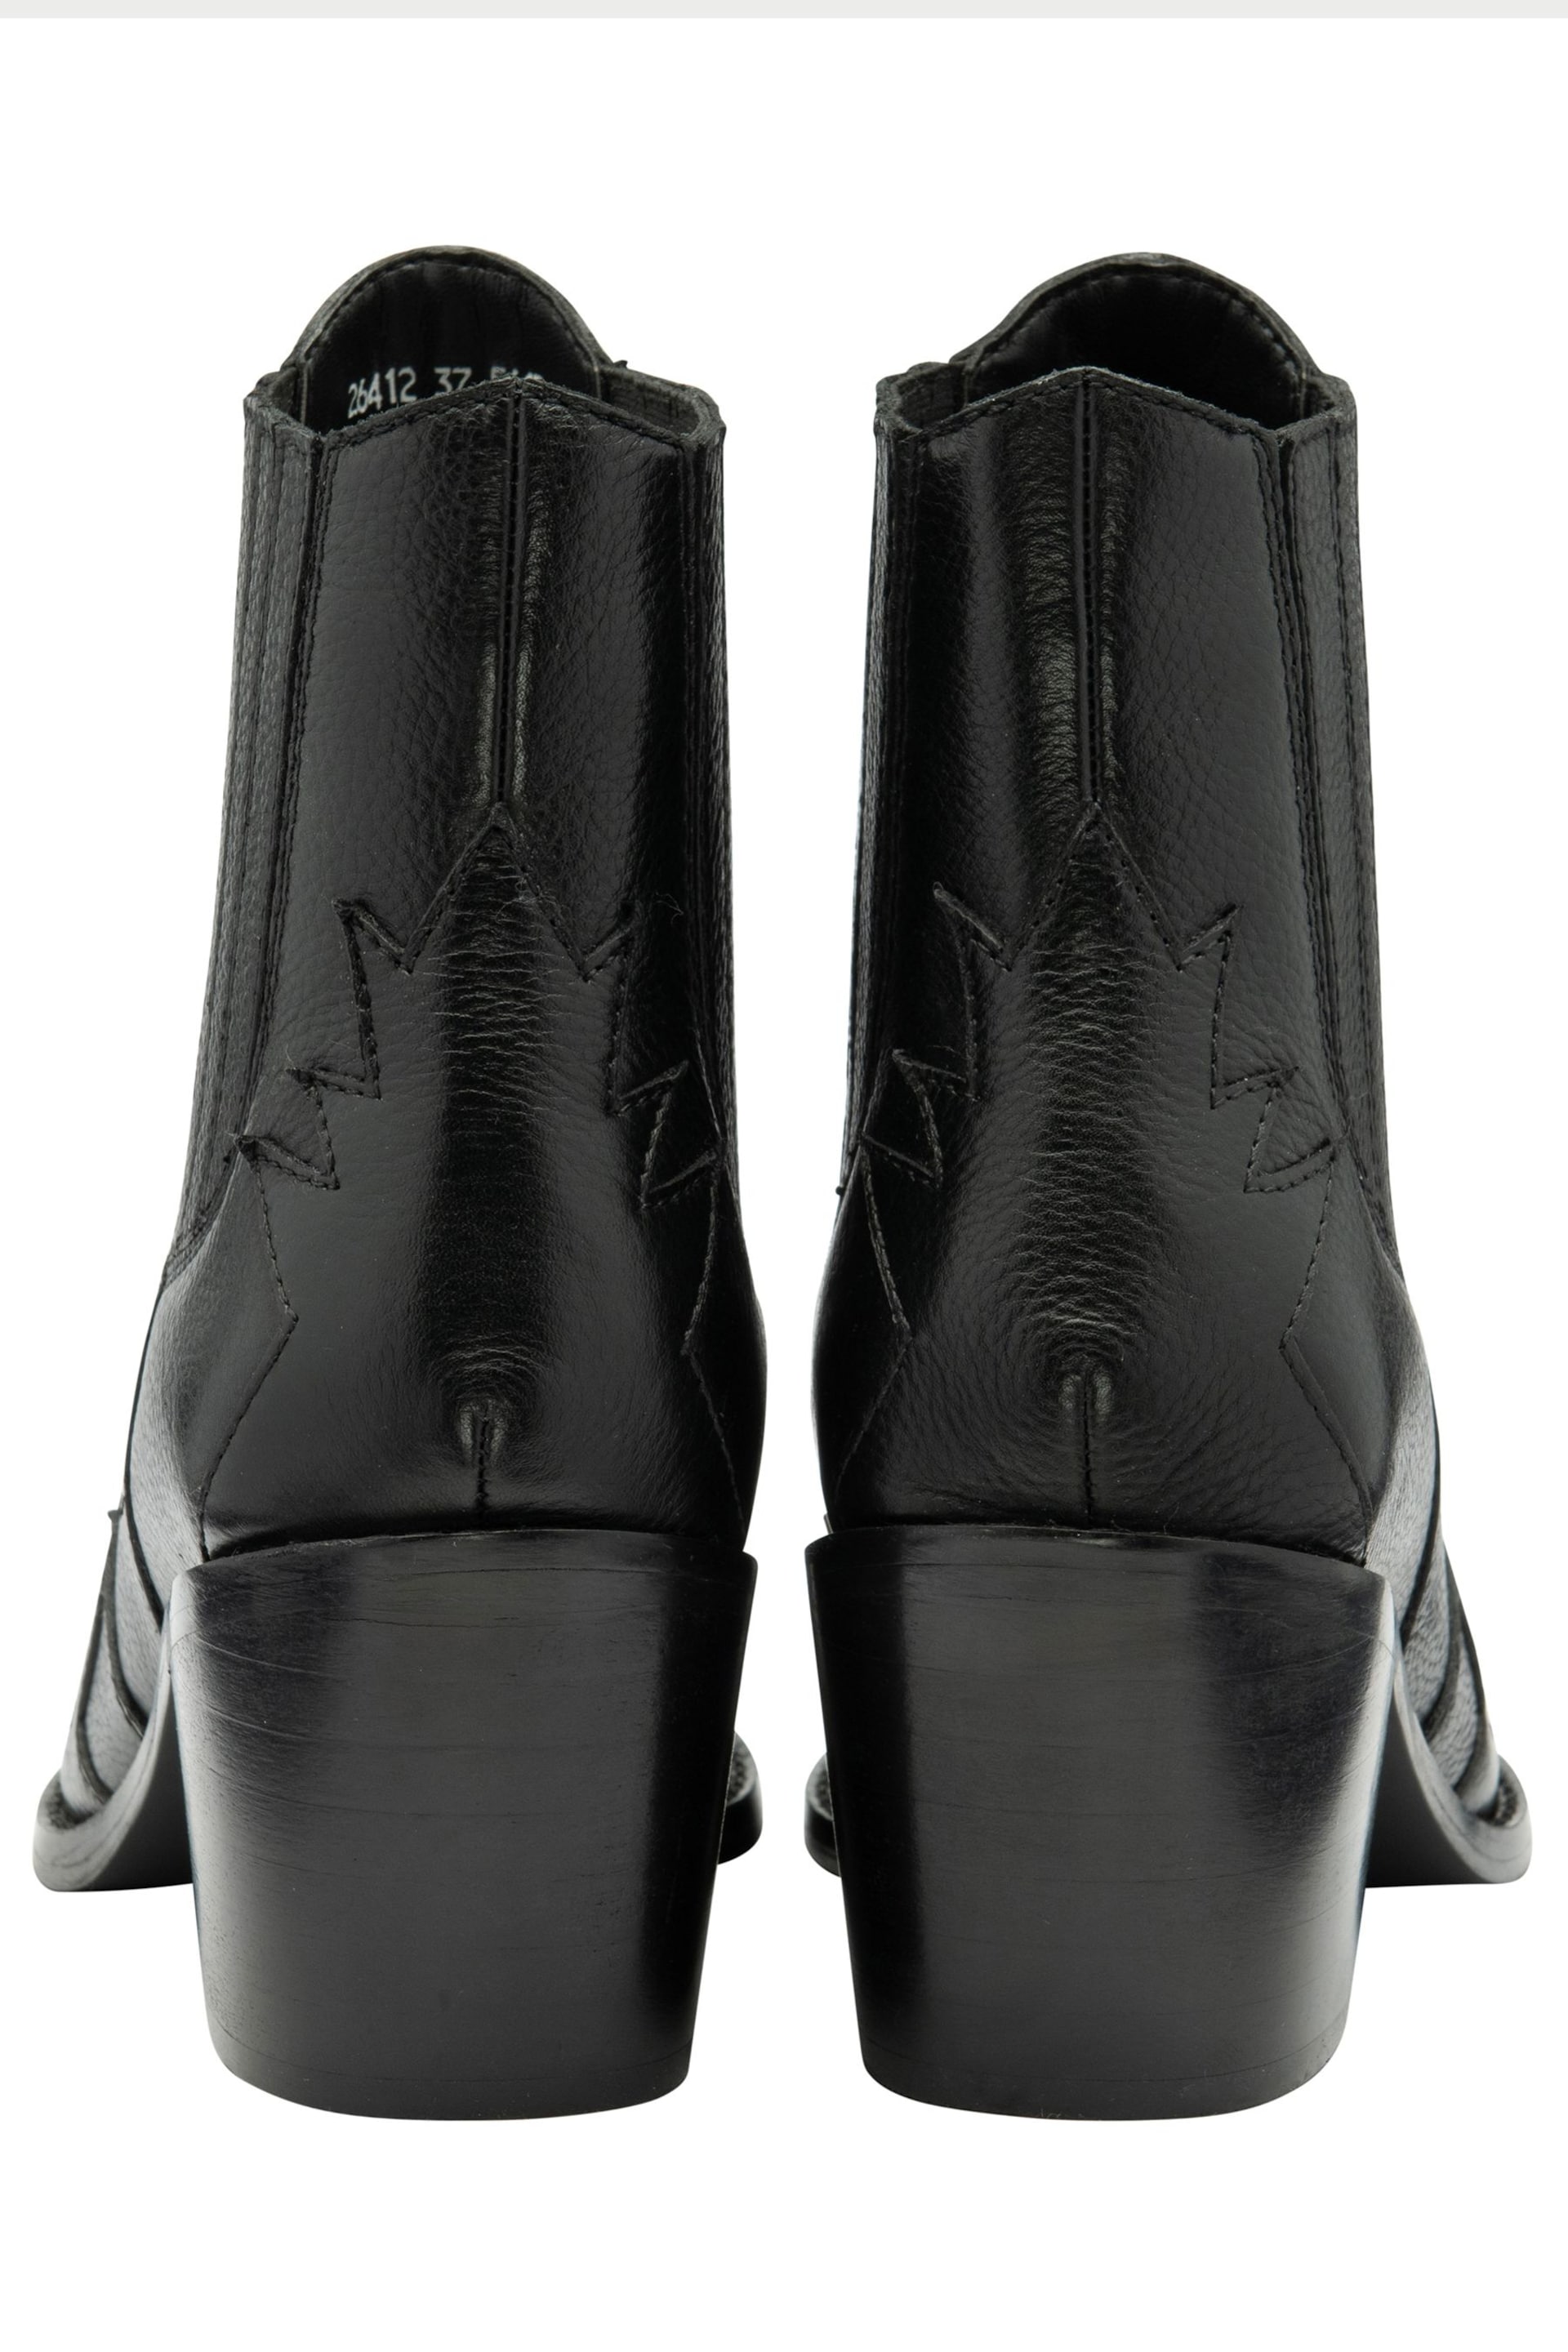 Ravel Black Leather Block Heel Western Ankle Boots - Image 3 of 4